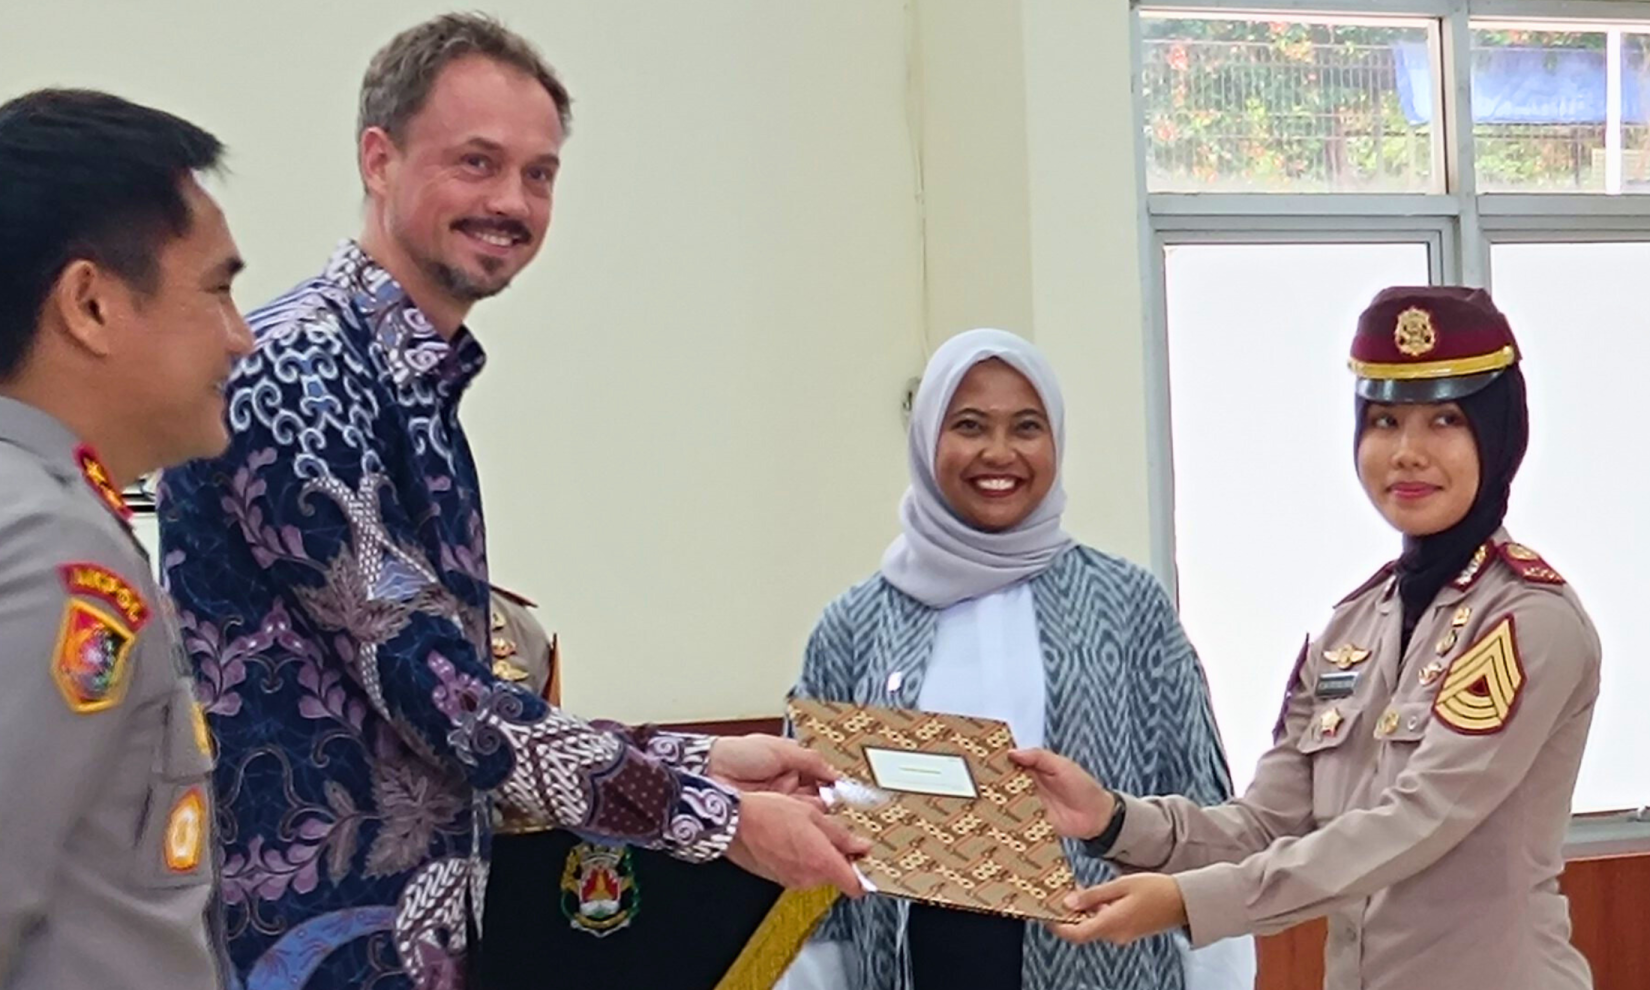 Erik Van Der Veen, UNODC Head of Office and Liaison for ASEAN, presented the award to Helena Fiorentina, 1st place winner in the UNODC Essay Competition on Police Integrity.